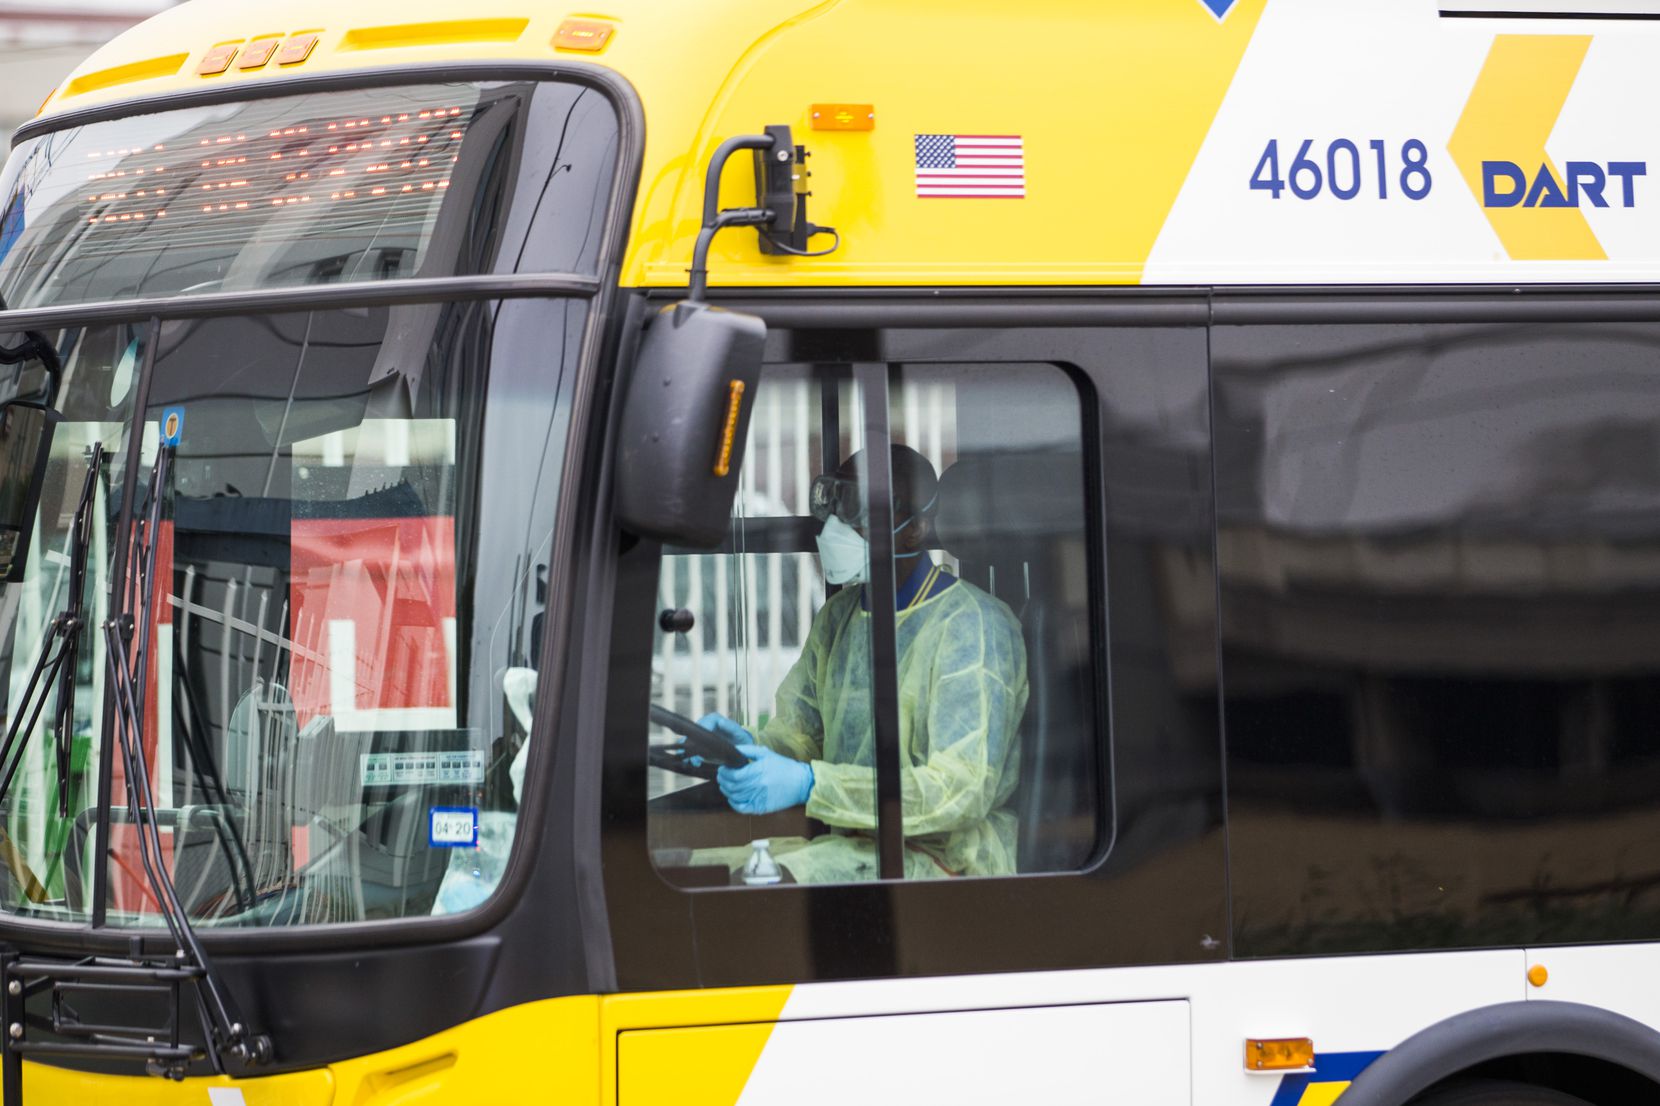 A DART bus driver was dressed in protective gear as he transported people away from Dallas Life homeless shelter on Friday, April 17, 2020. The facility reported 17 people who tested positive for the coronavirus, and 171 people who have been exposed.